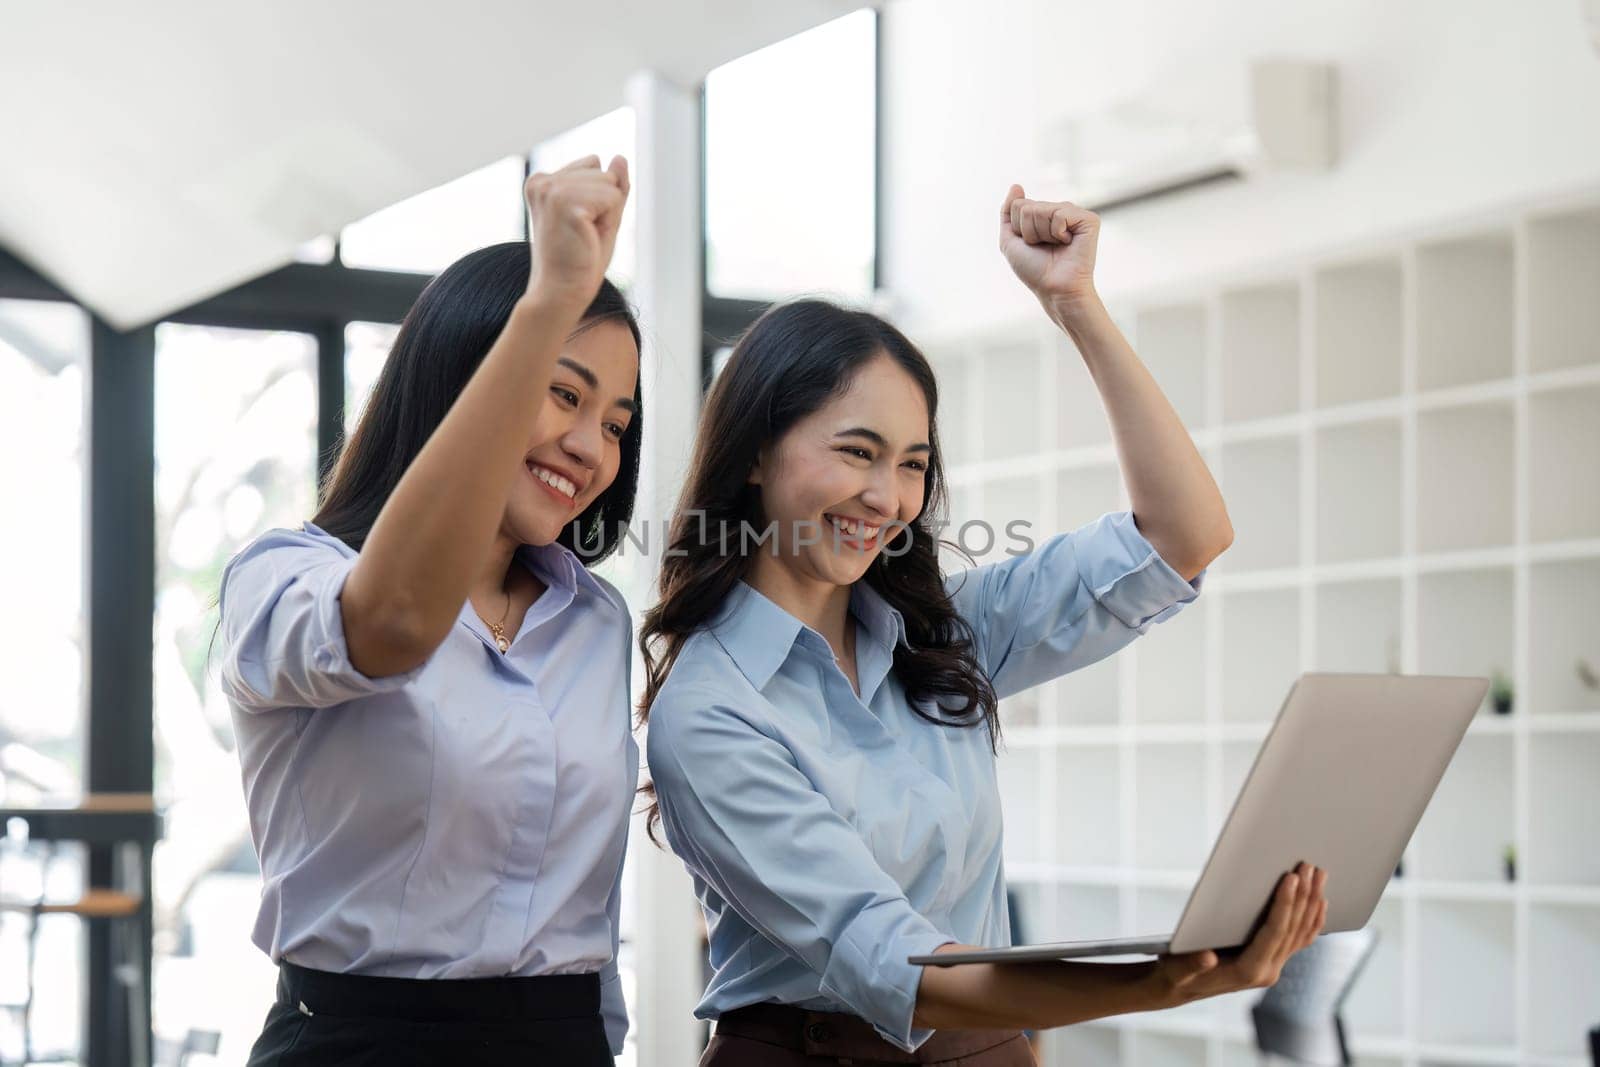 Two young businesswomen show joyful expression of success at work smiling happily with a laptop computer in a modern office.